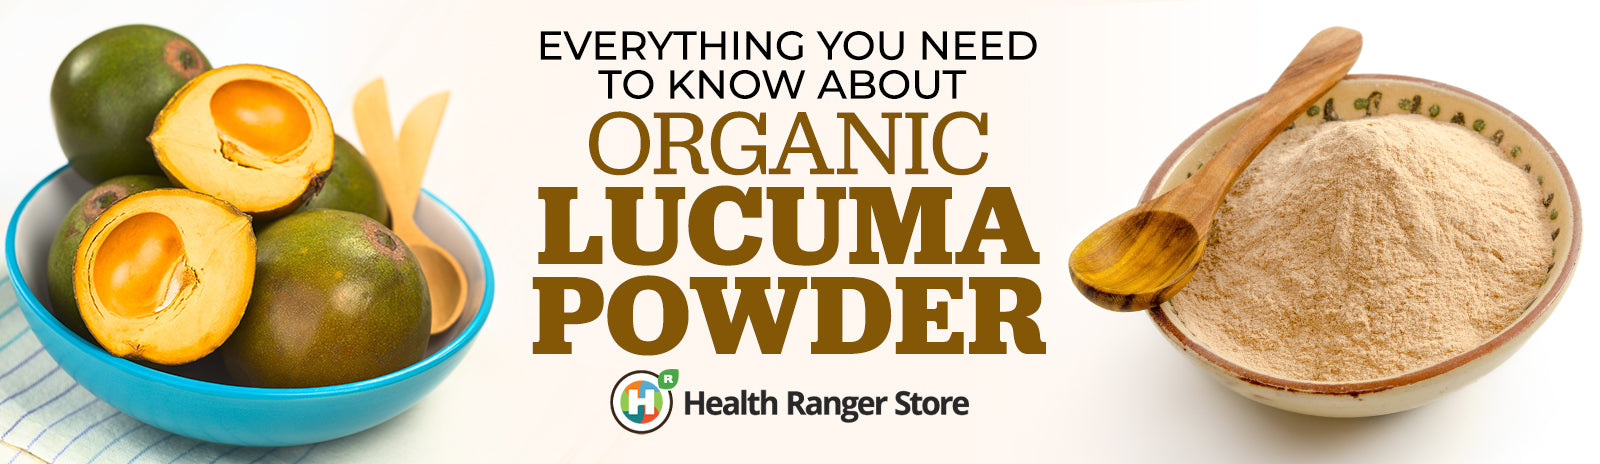 Everything you need to know about organic lucuma powder